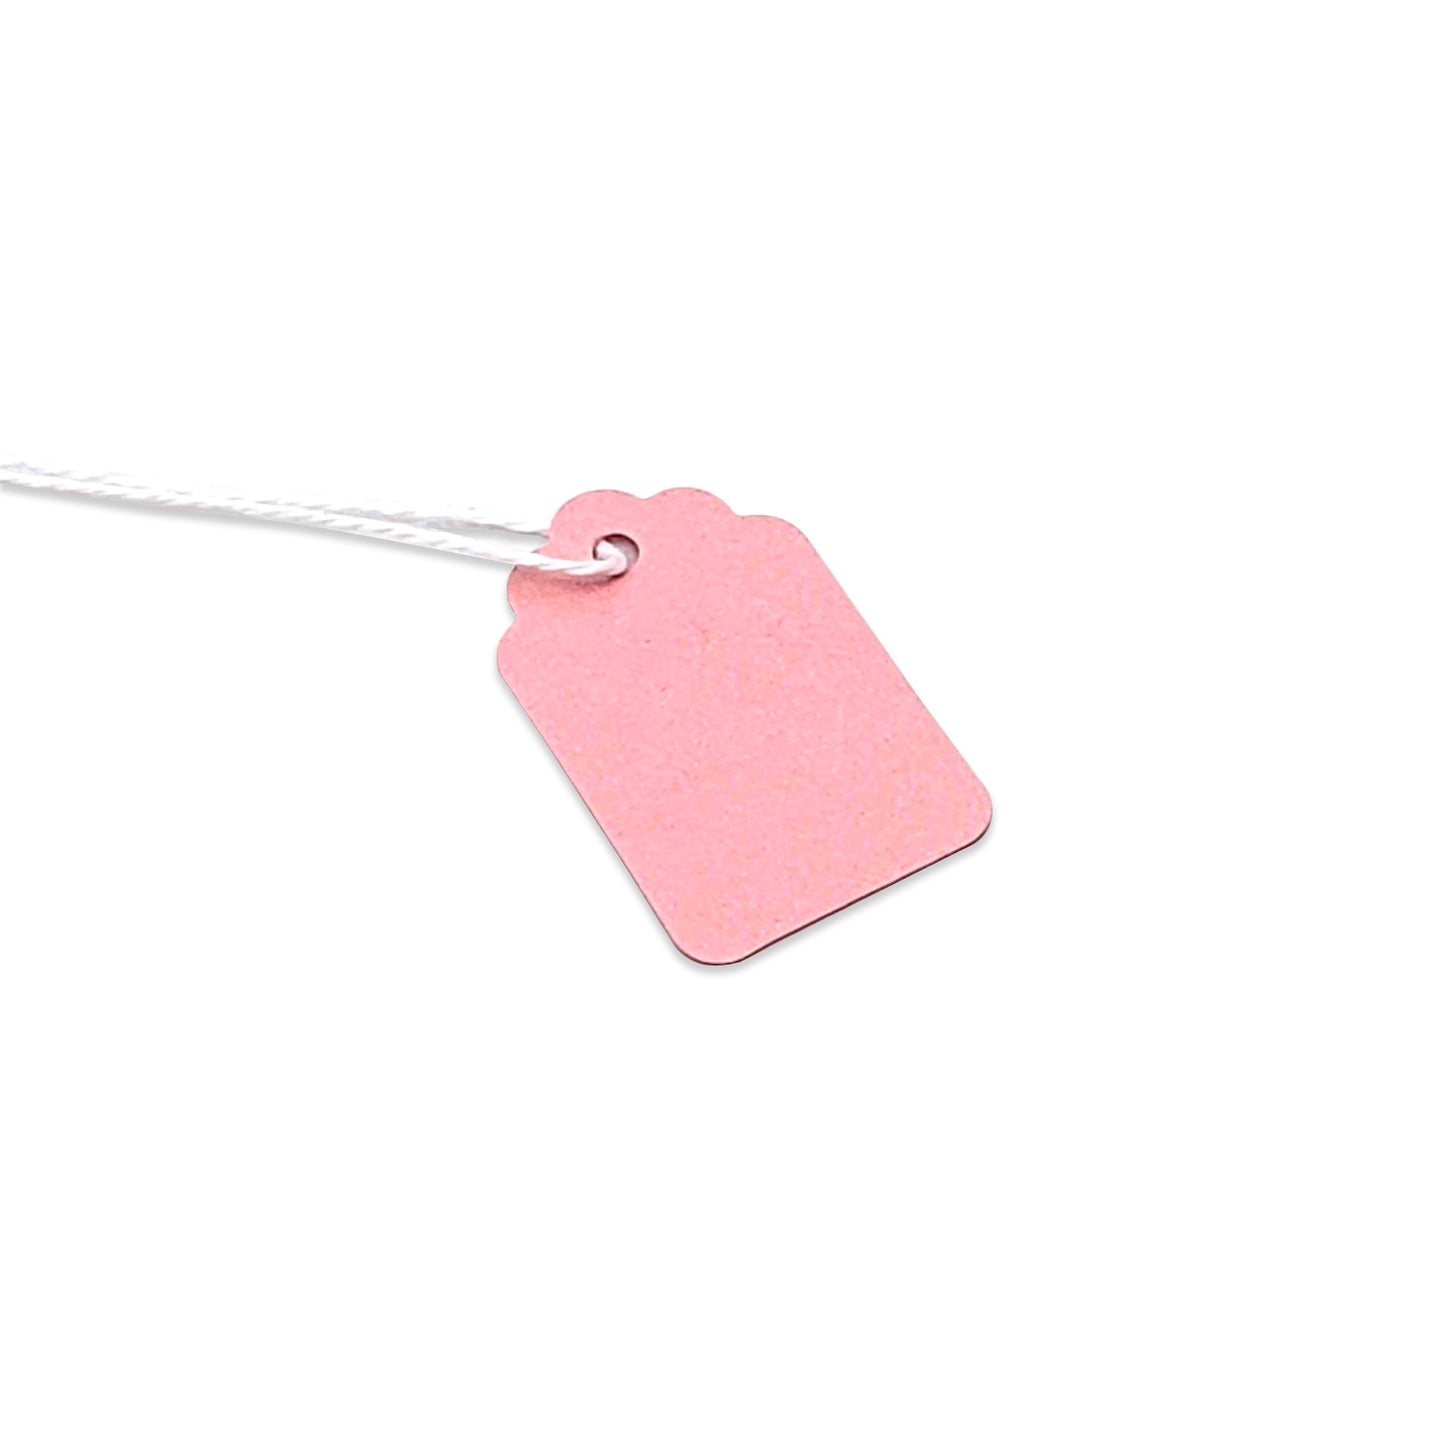 22 x 35mm Pink Paper Knotted String Price Tags